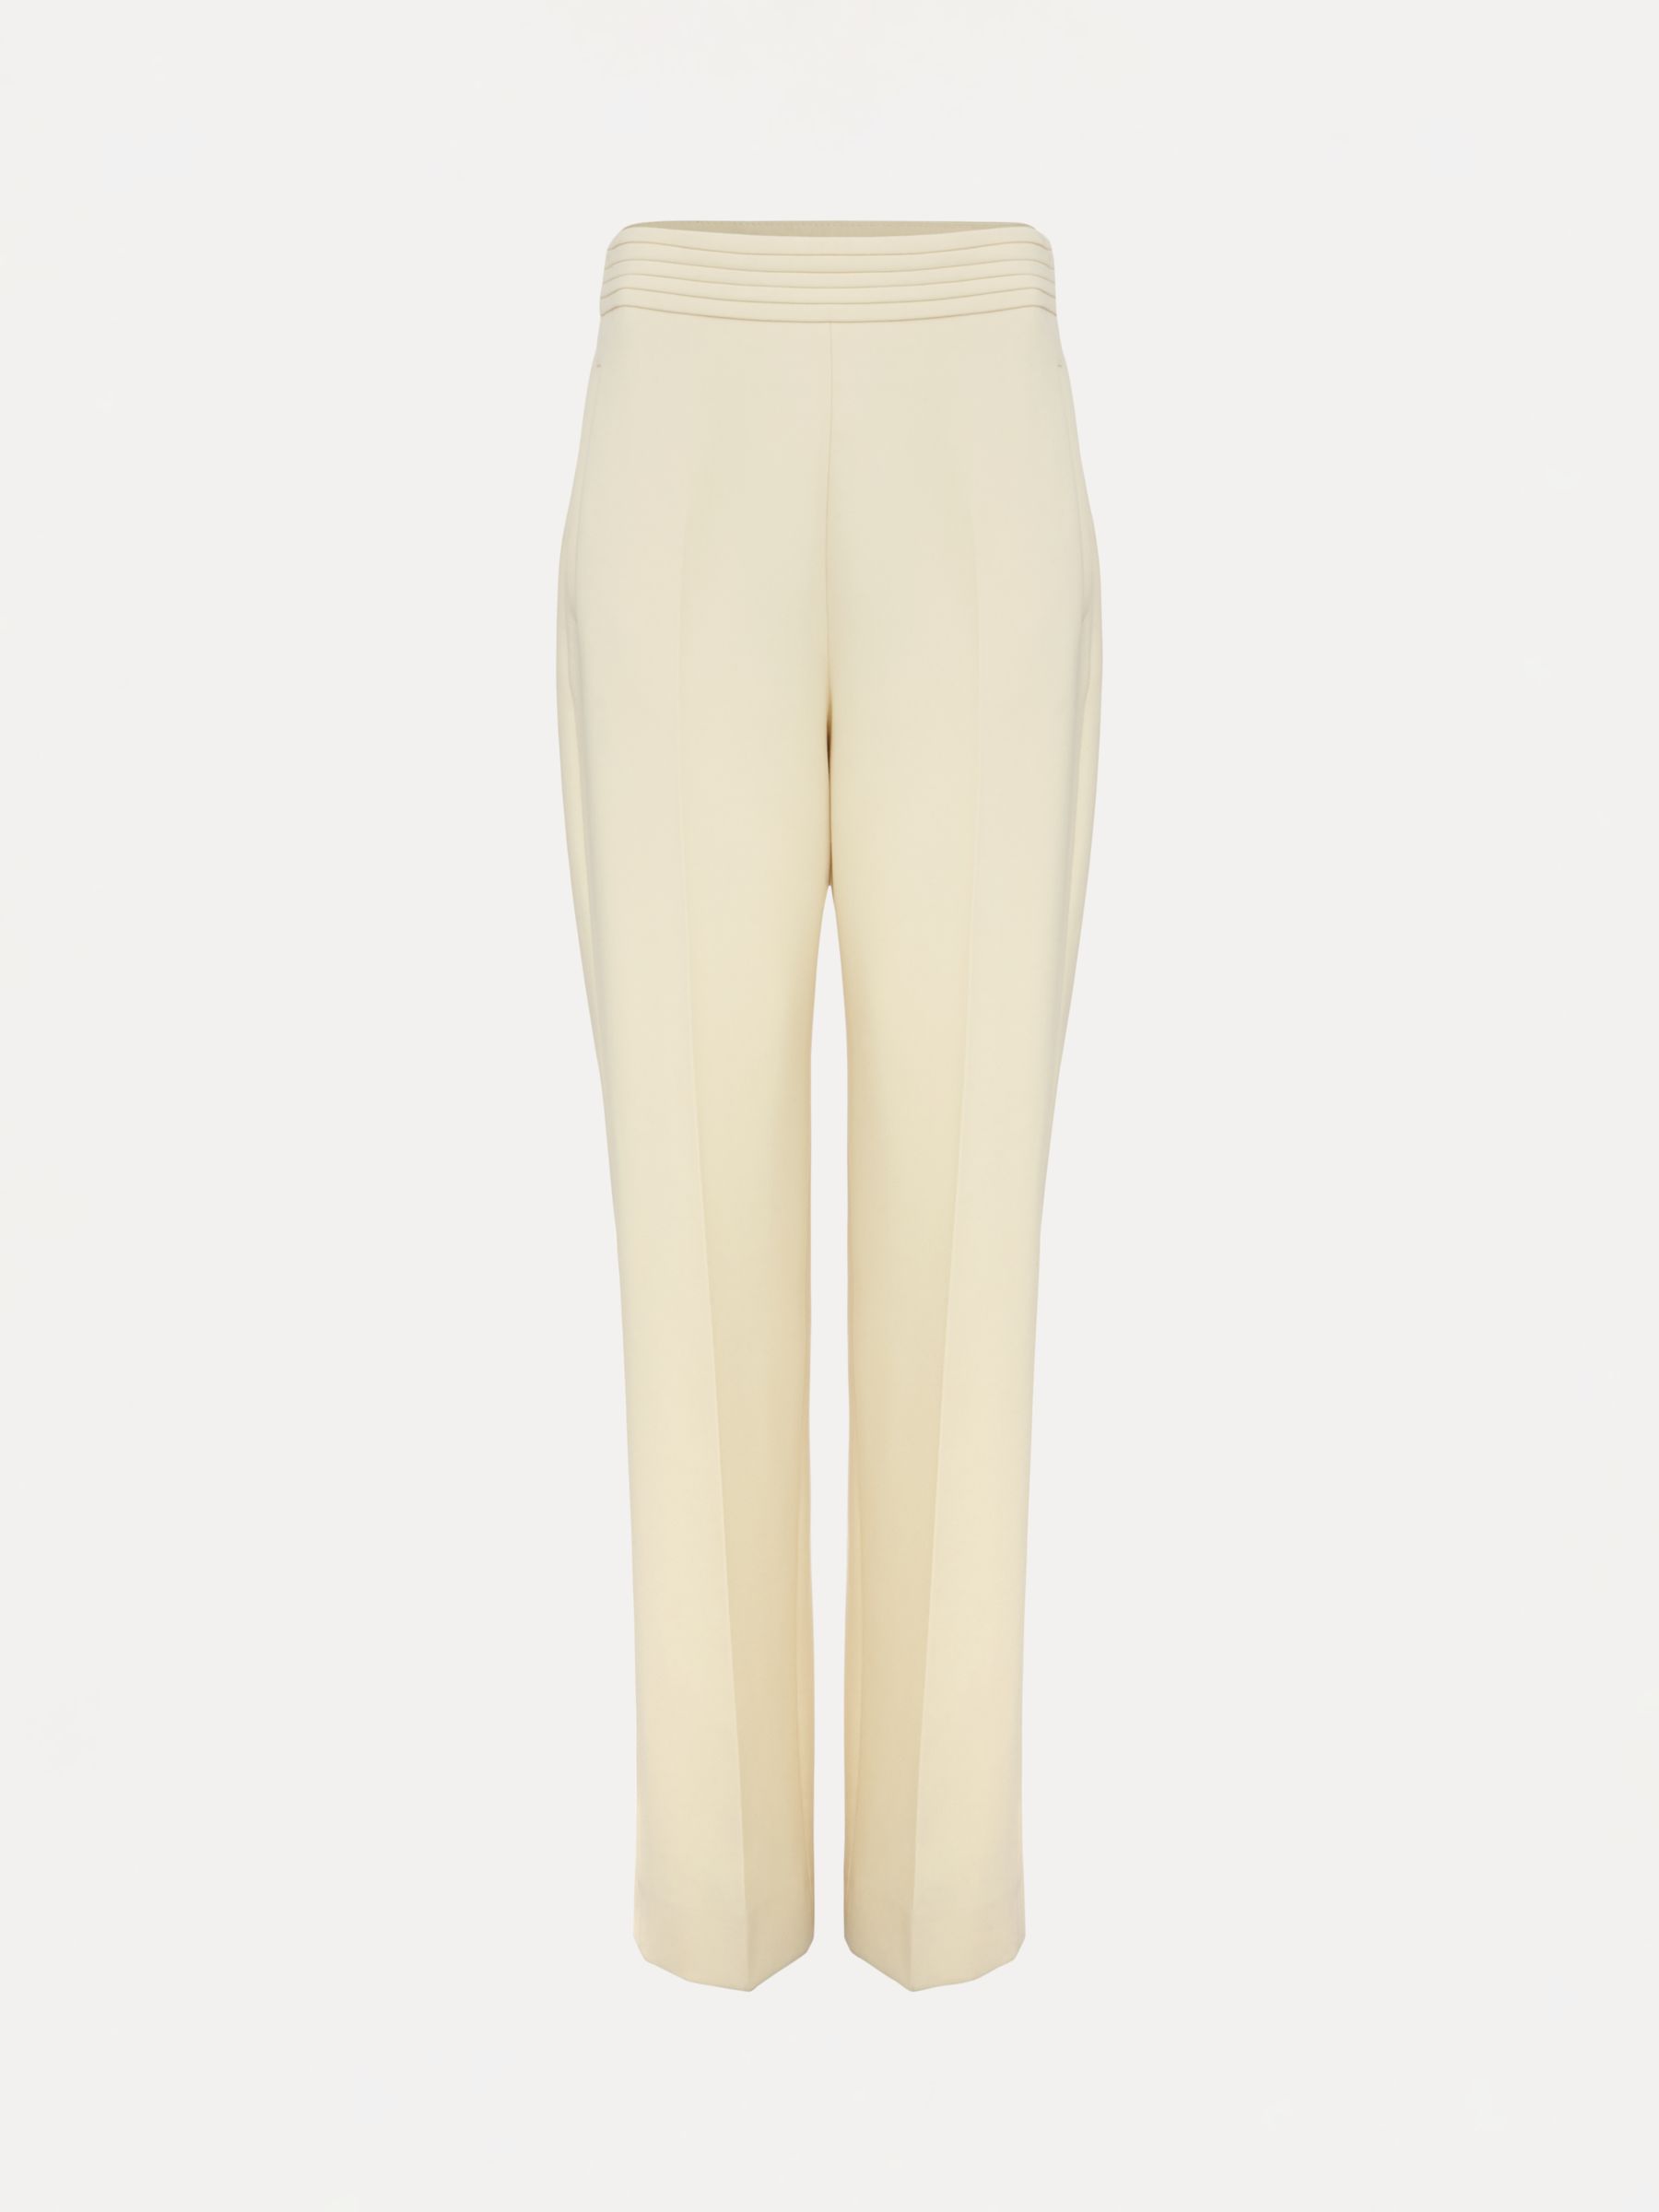 Phase Eight Alexis Pleat Waistband Trousers, Yellow, 8